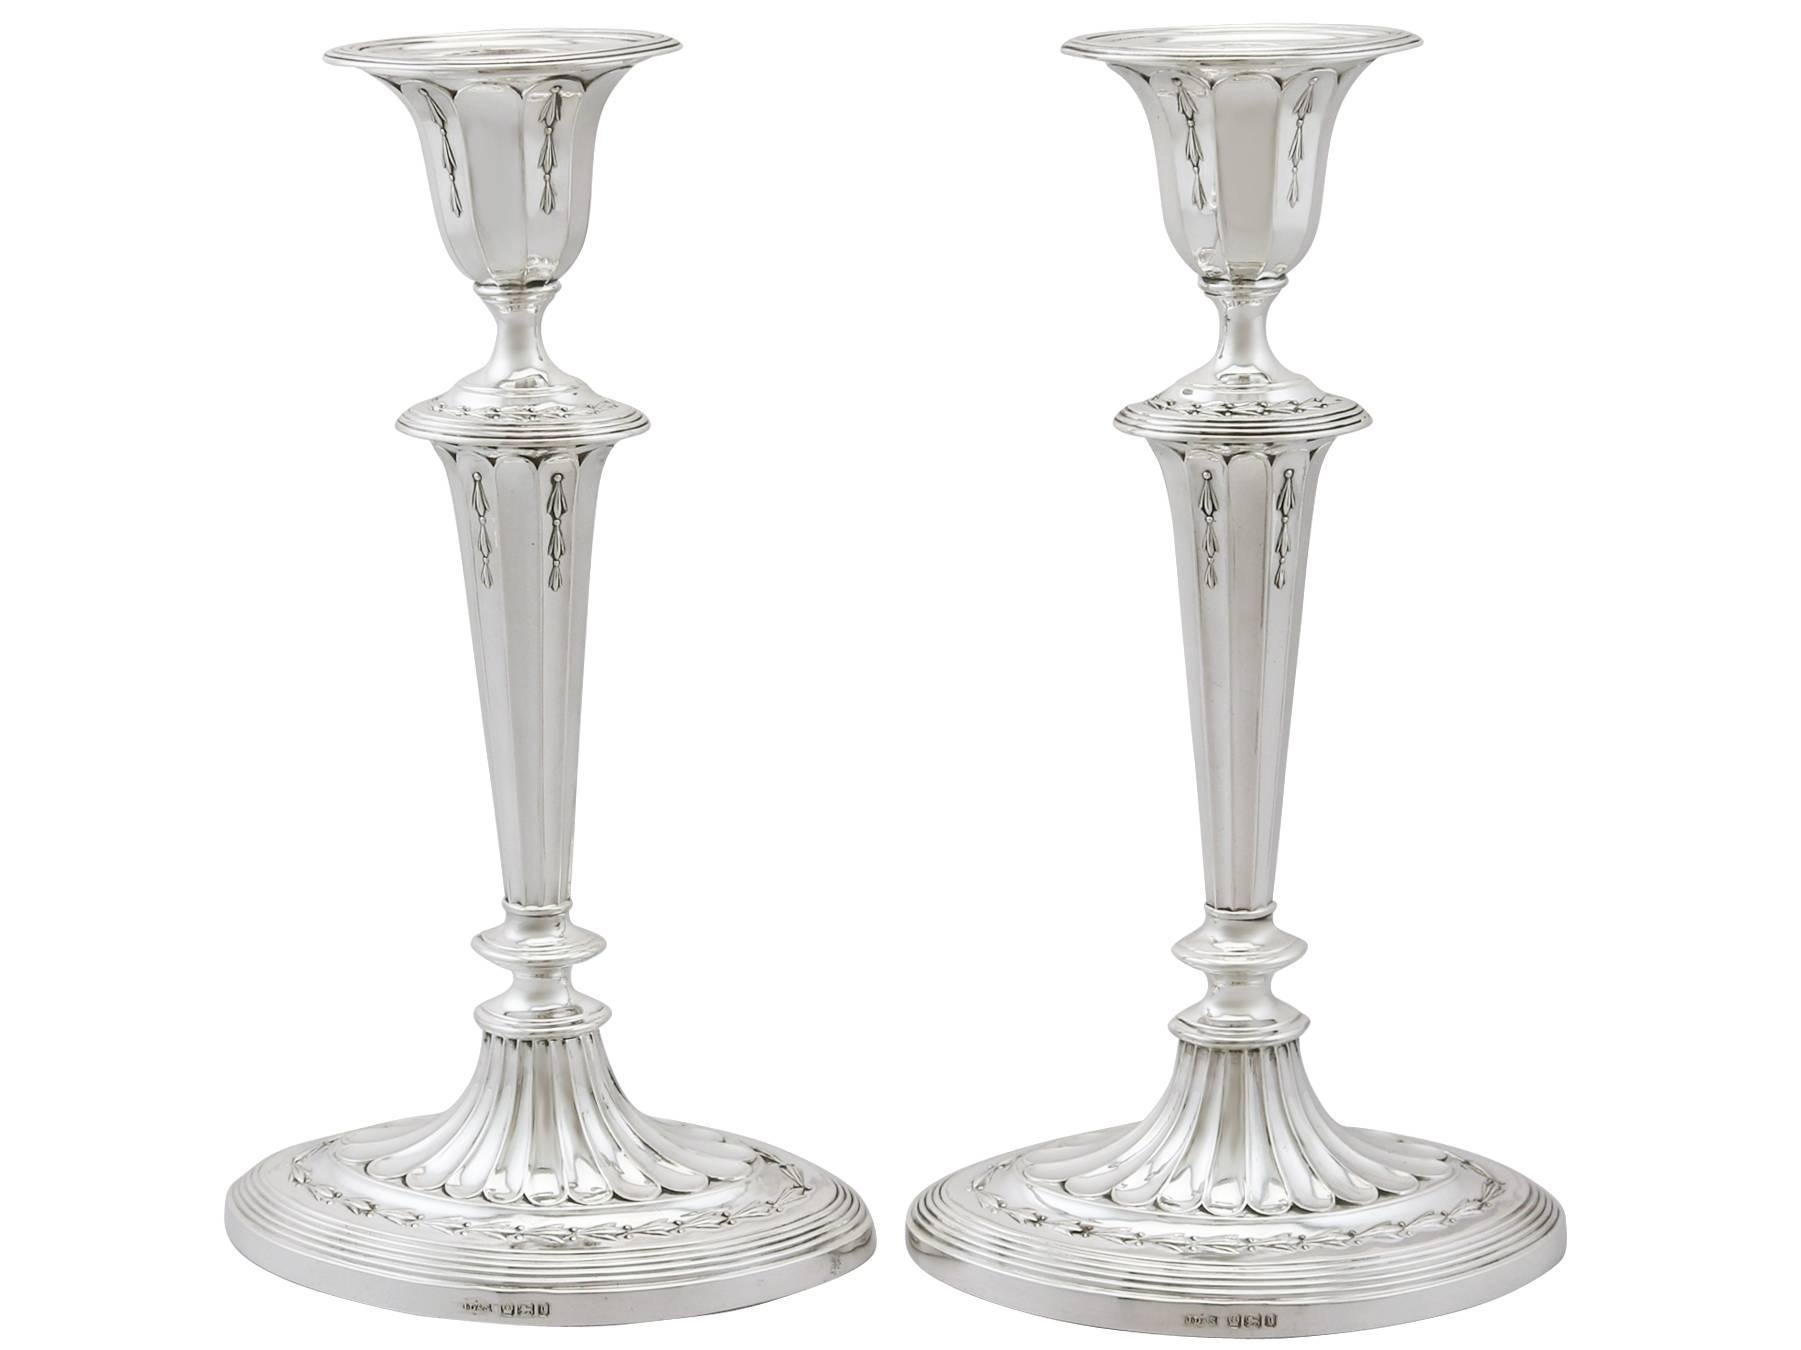 An exceptional, fine and impressive pair of antique Victorian English sterling silver candlesticks made by James Dixon & Sons; an addition of our ornamental silverware collection.

These exceptional antique Victorian Sheffield sterling silver